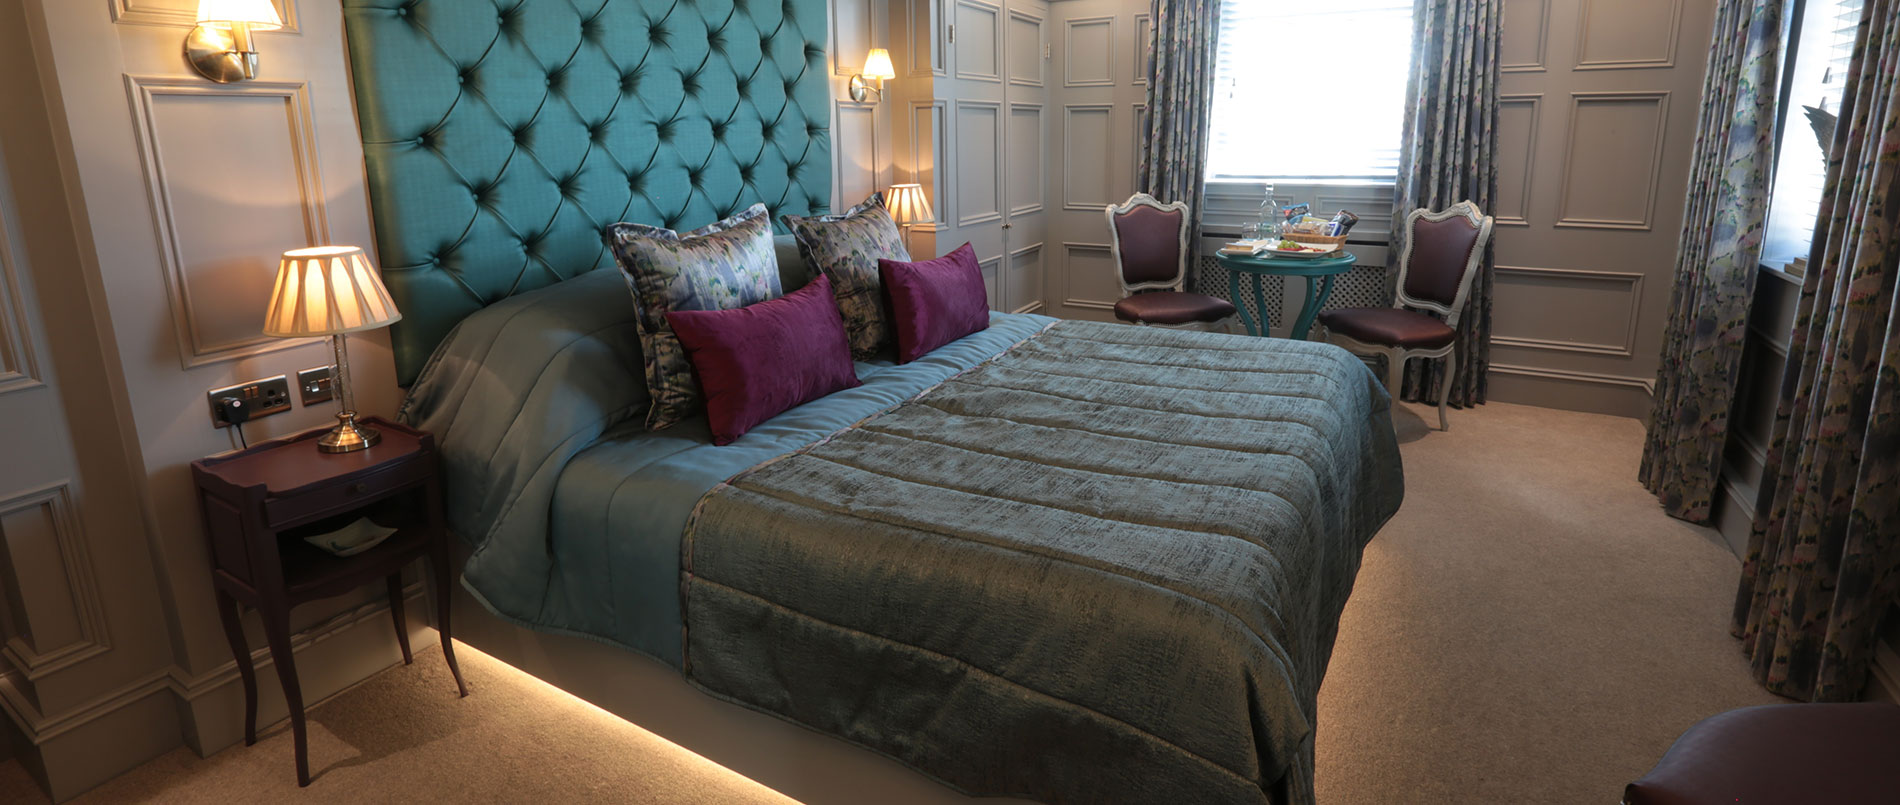 luxury suites available in doncaster